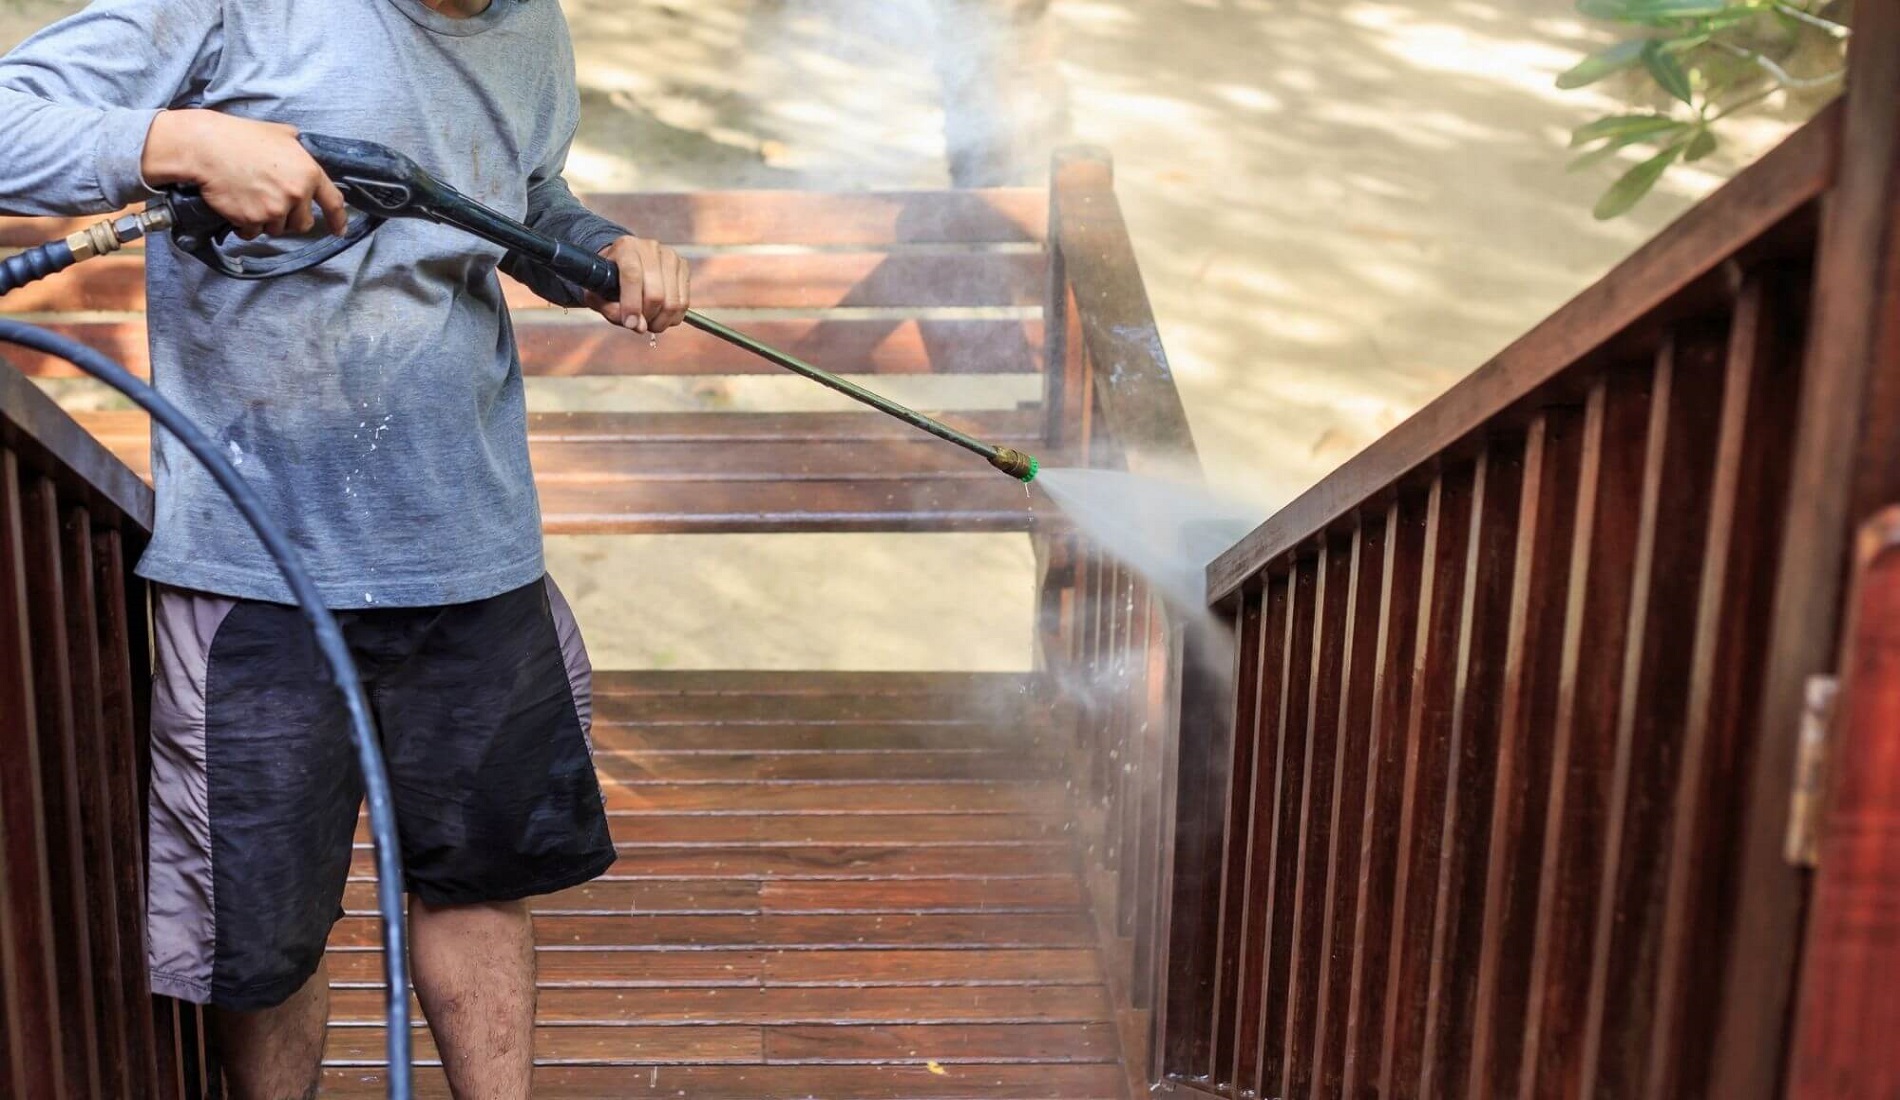 Things-You-Should-Never-Clean-with-a-Pressure-Washer